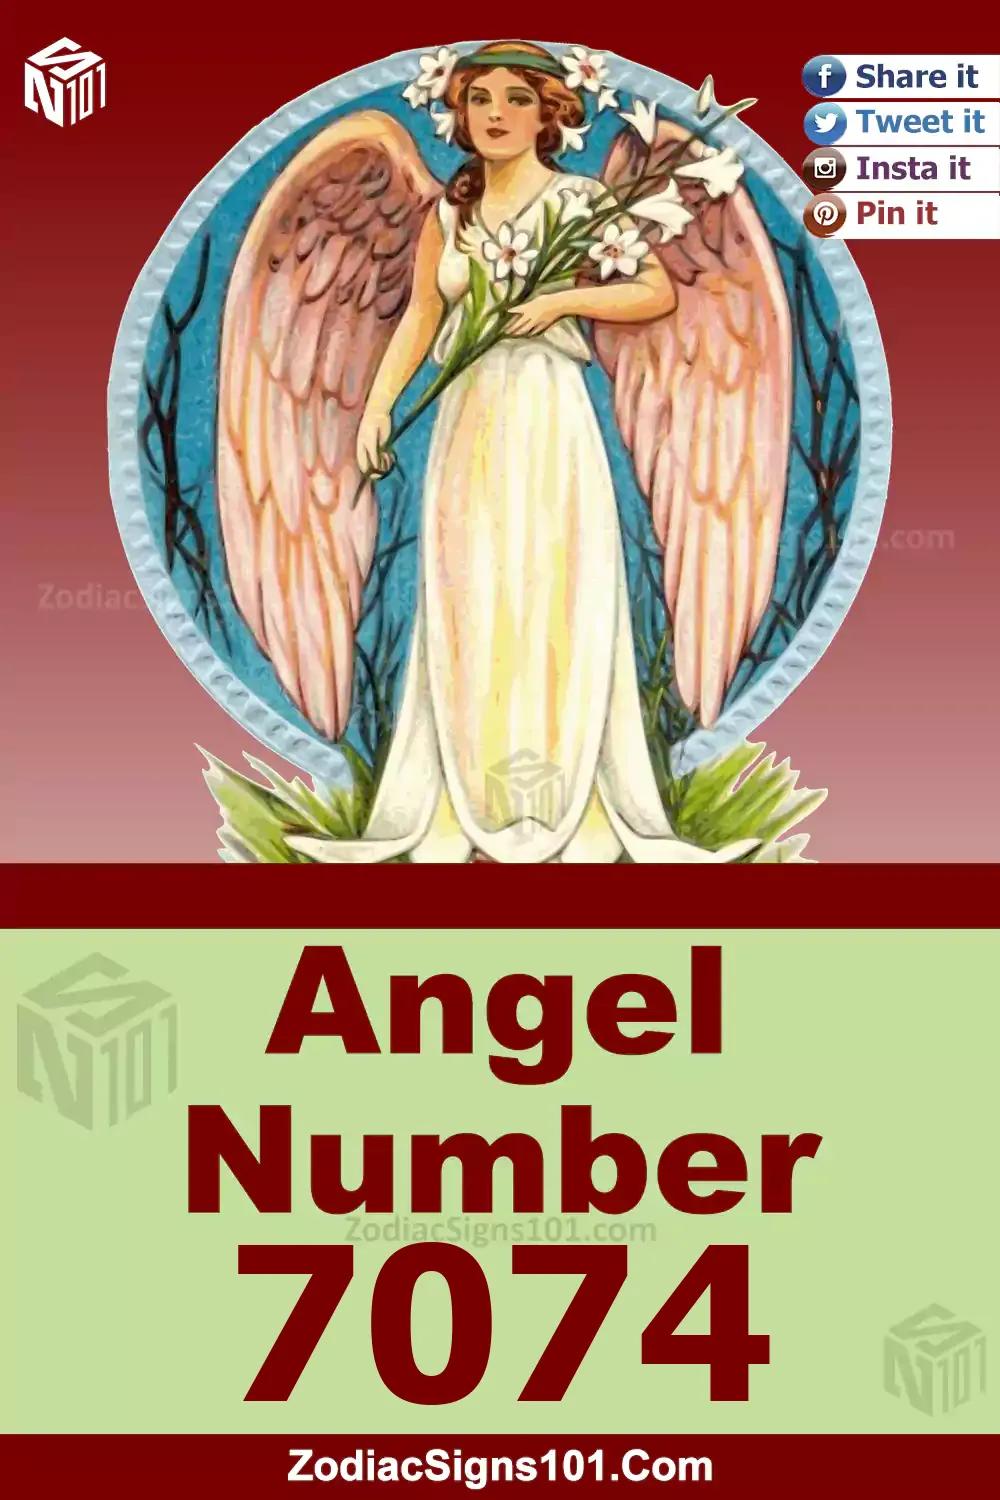 7074 Angel Number Meaning